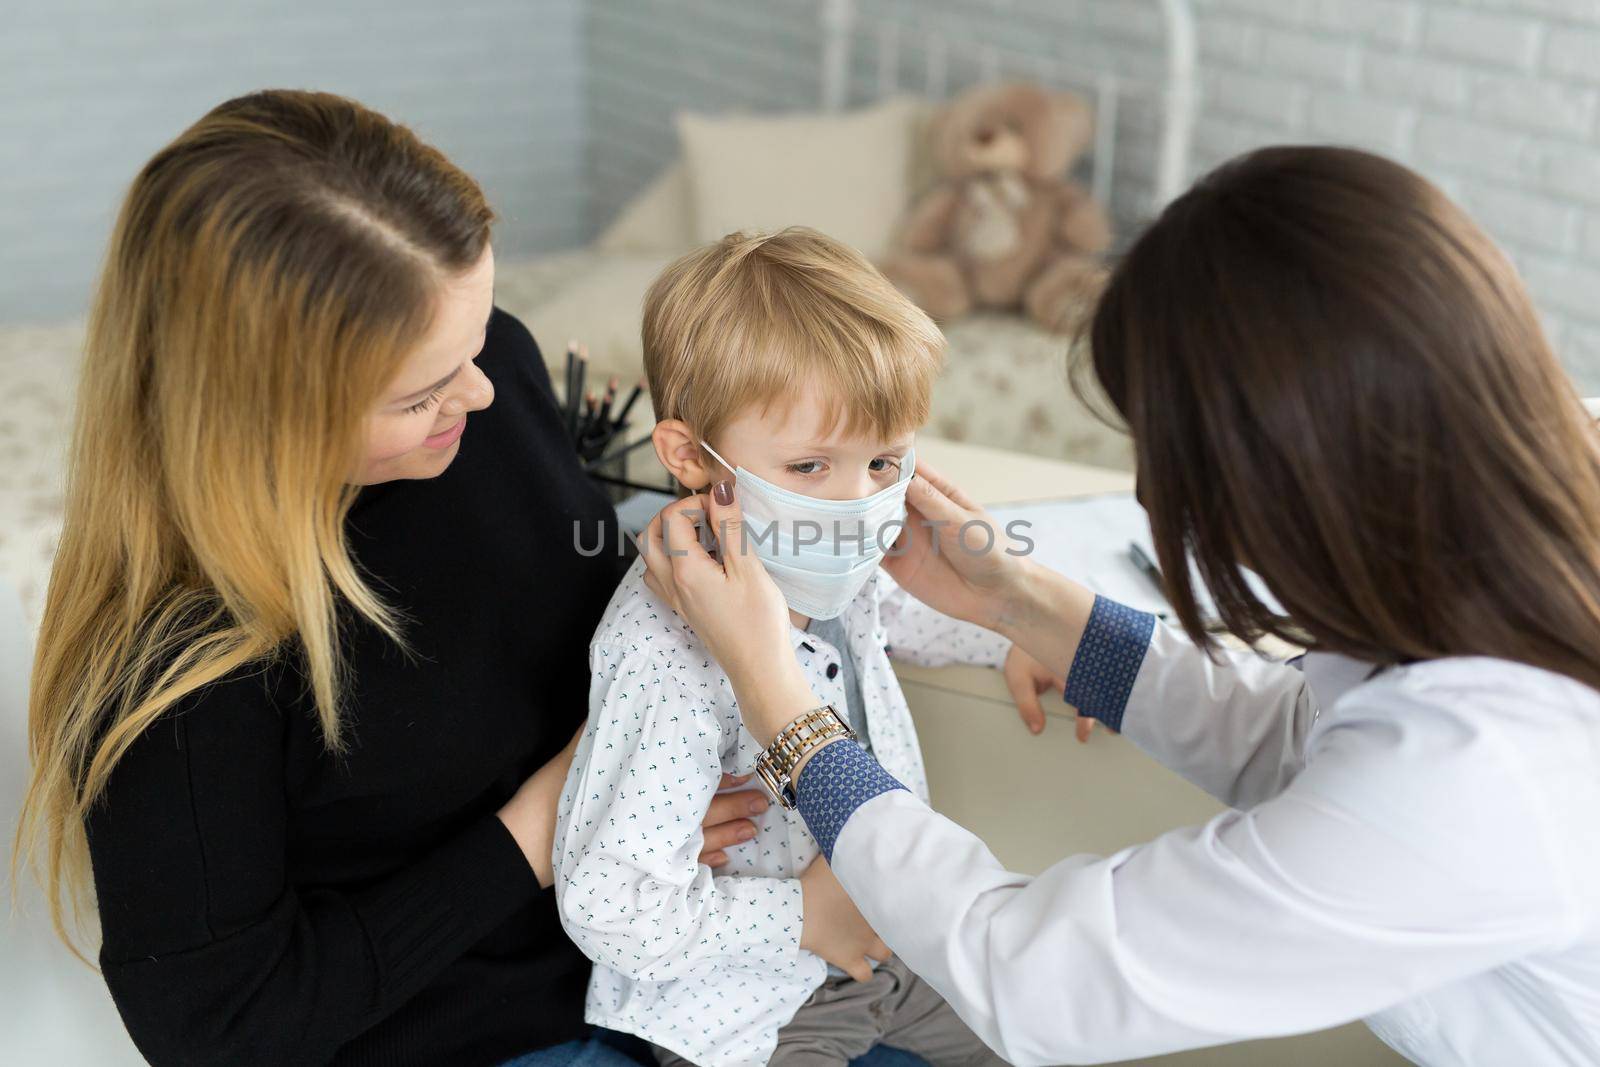 A boy in a medical mask at a doctor's appointment. by StudioPeace